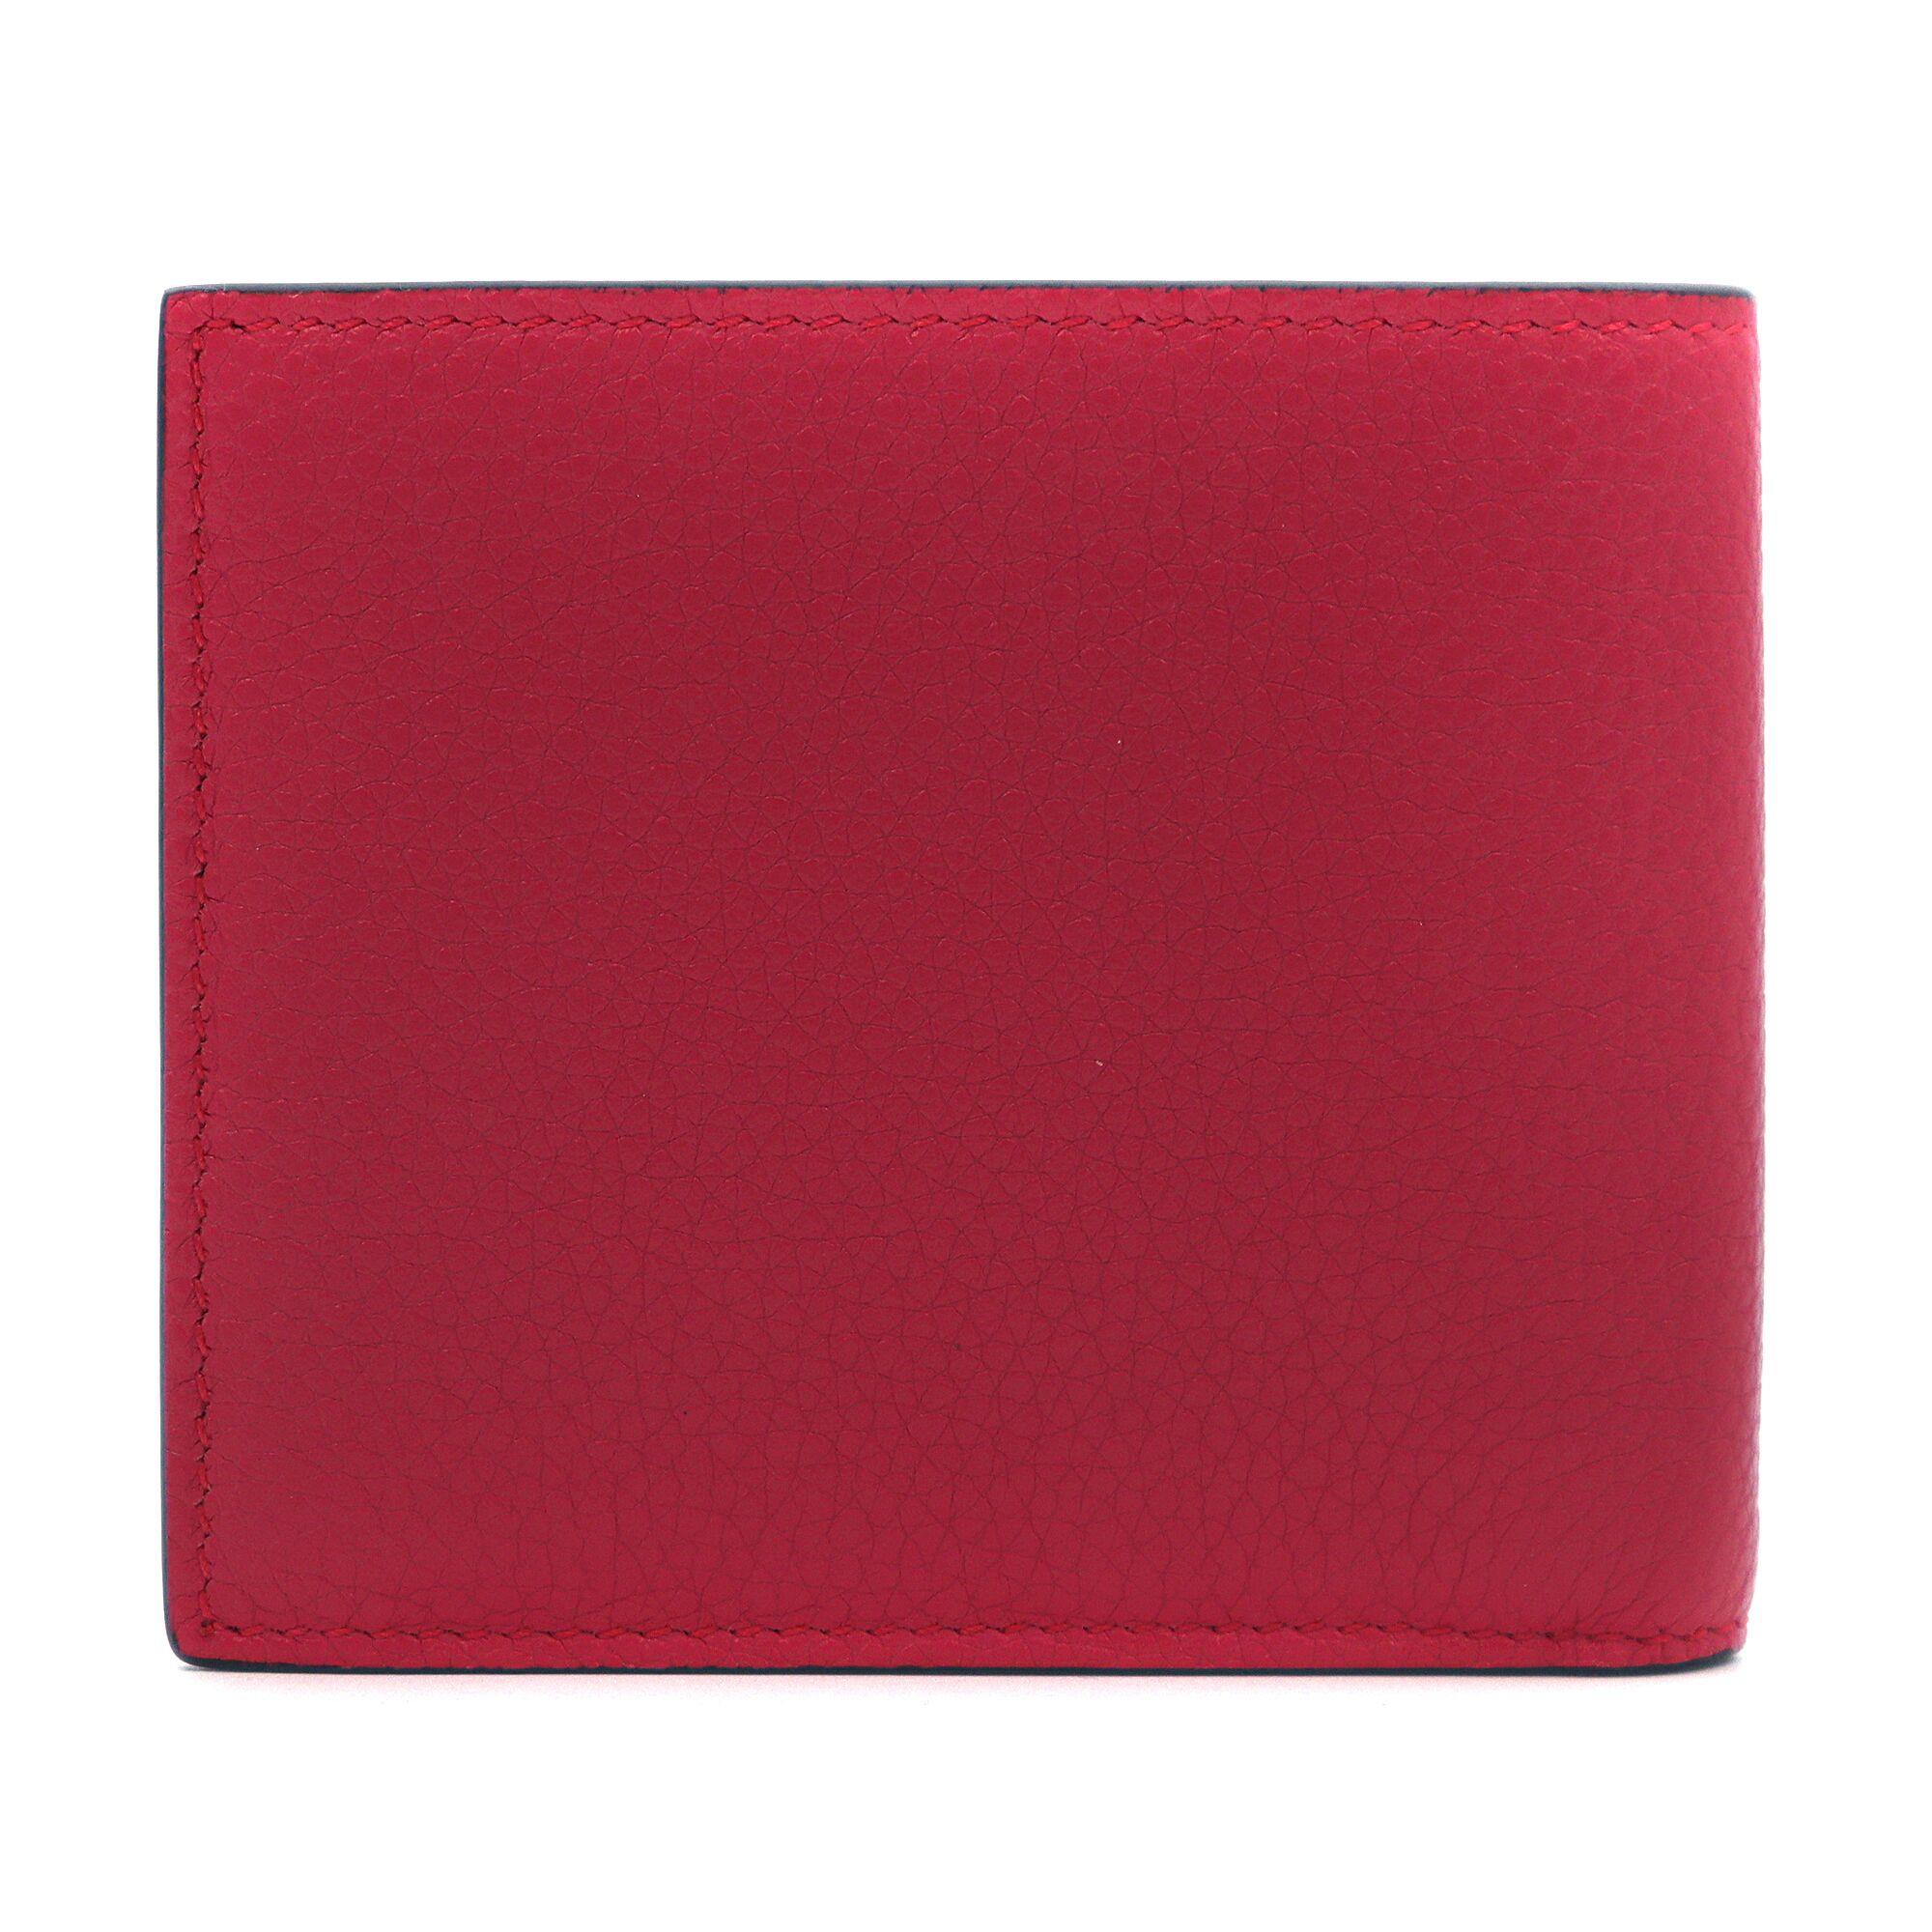 Gucci Print leather bi-fold wallet. This wallet is inspired by vintage prints from the eighties, the Gucci logo is brought to the forefront. The retro-style motif is presented on the front of a bi-fold wallet in supple, textured leather. Pink